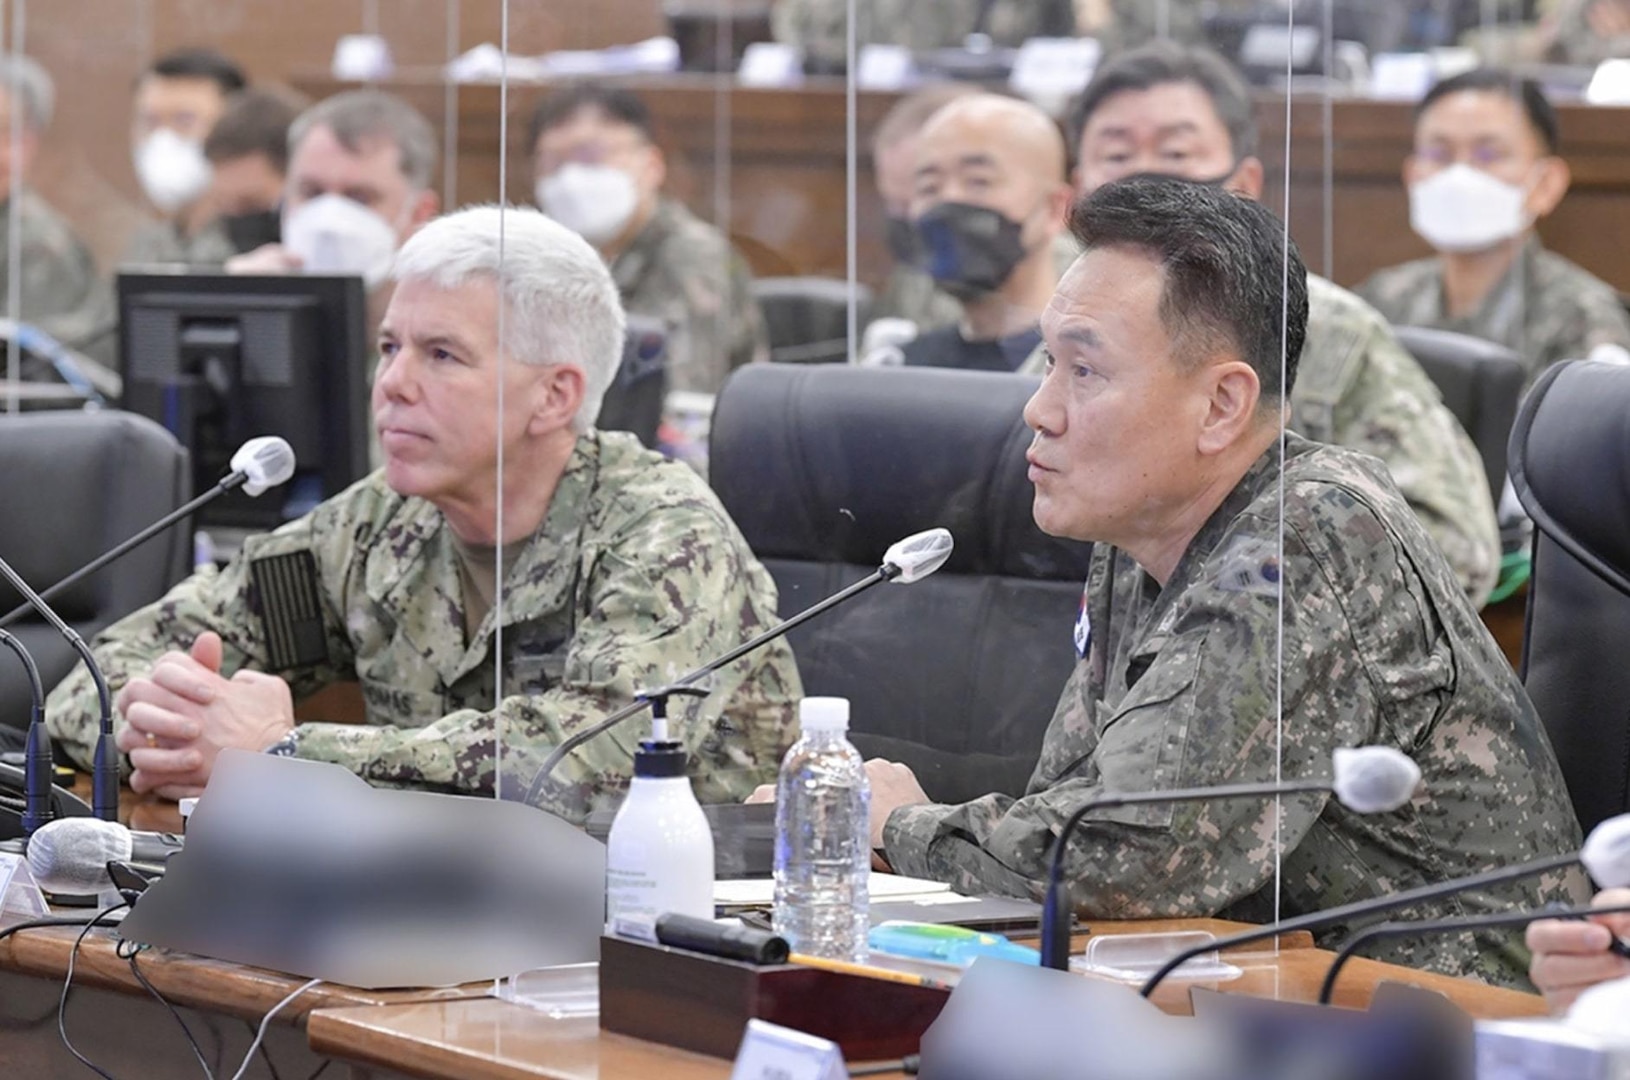 230202-N-SO091-029 Republic of Korea (Feb. 2, 2023) Vice Adm. Karl Thomas, Commander, US 7th Fleet (left) and Vice Admiral Kim Jung-soo, Commander Republic of Korea Fleet (right) receive a combined brief on naval operations in and around the Korean peninsula. Vice Adm. Thomas is in the Republic of Korea to attend the 7th annual Anti-submarine Warfare Cooperation Committee meeting. (Courtesy photo by Commander, ROK Fleet Public Affairs)